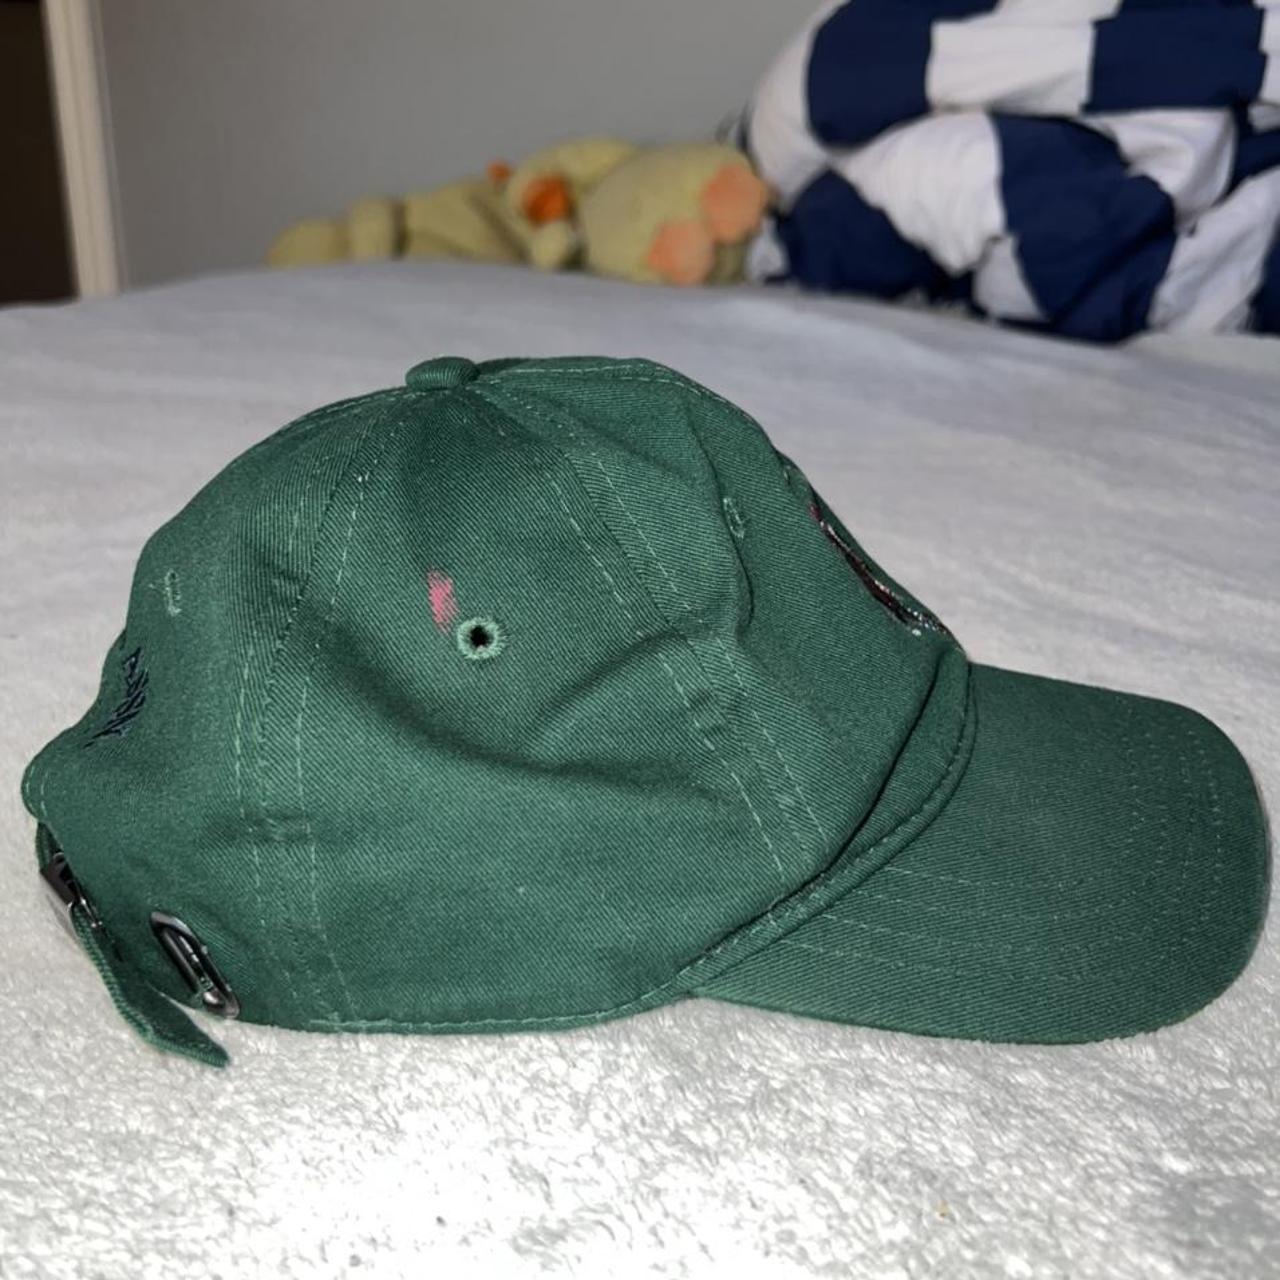 U.S. Polo Assn. Men's Green and Red Hat (4)